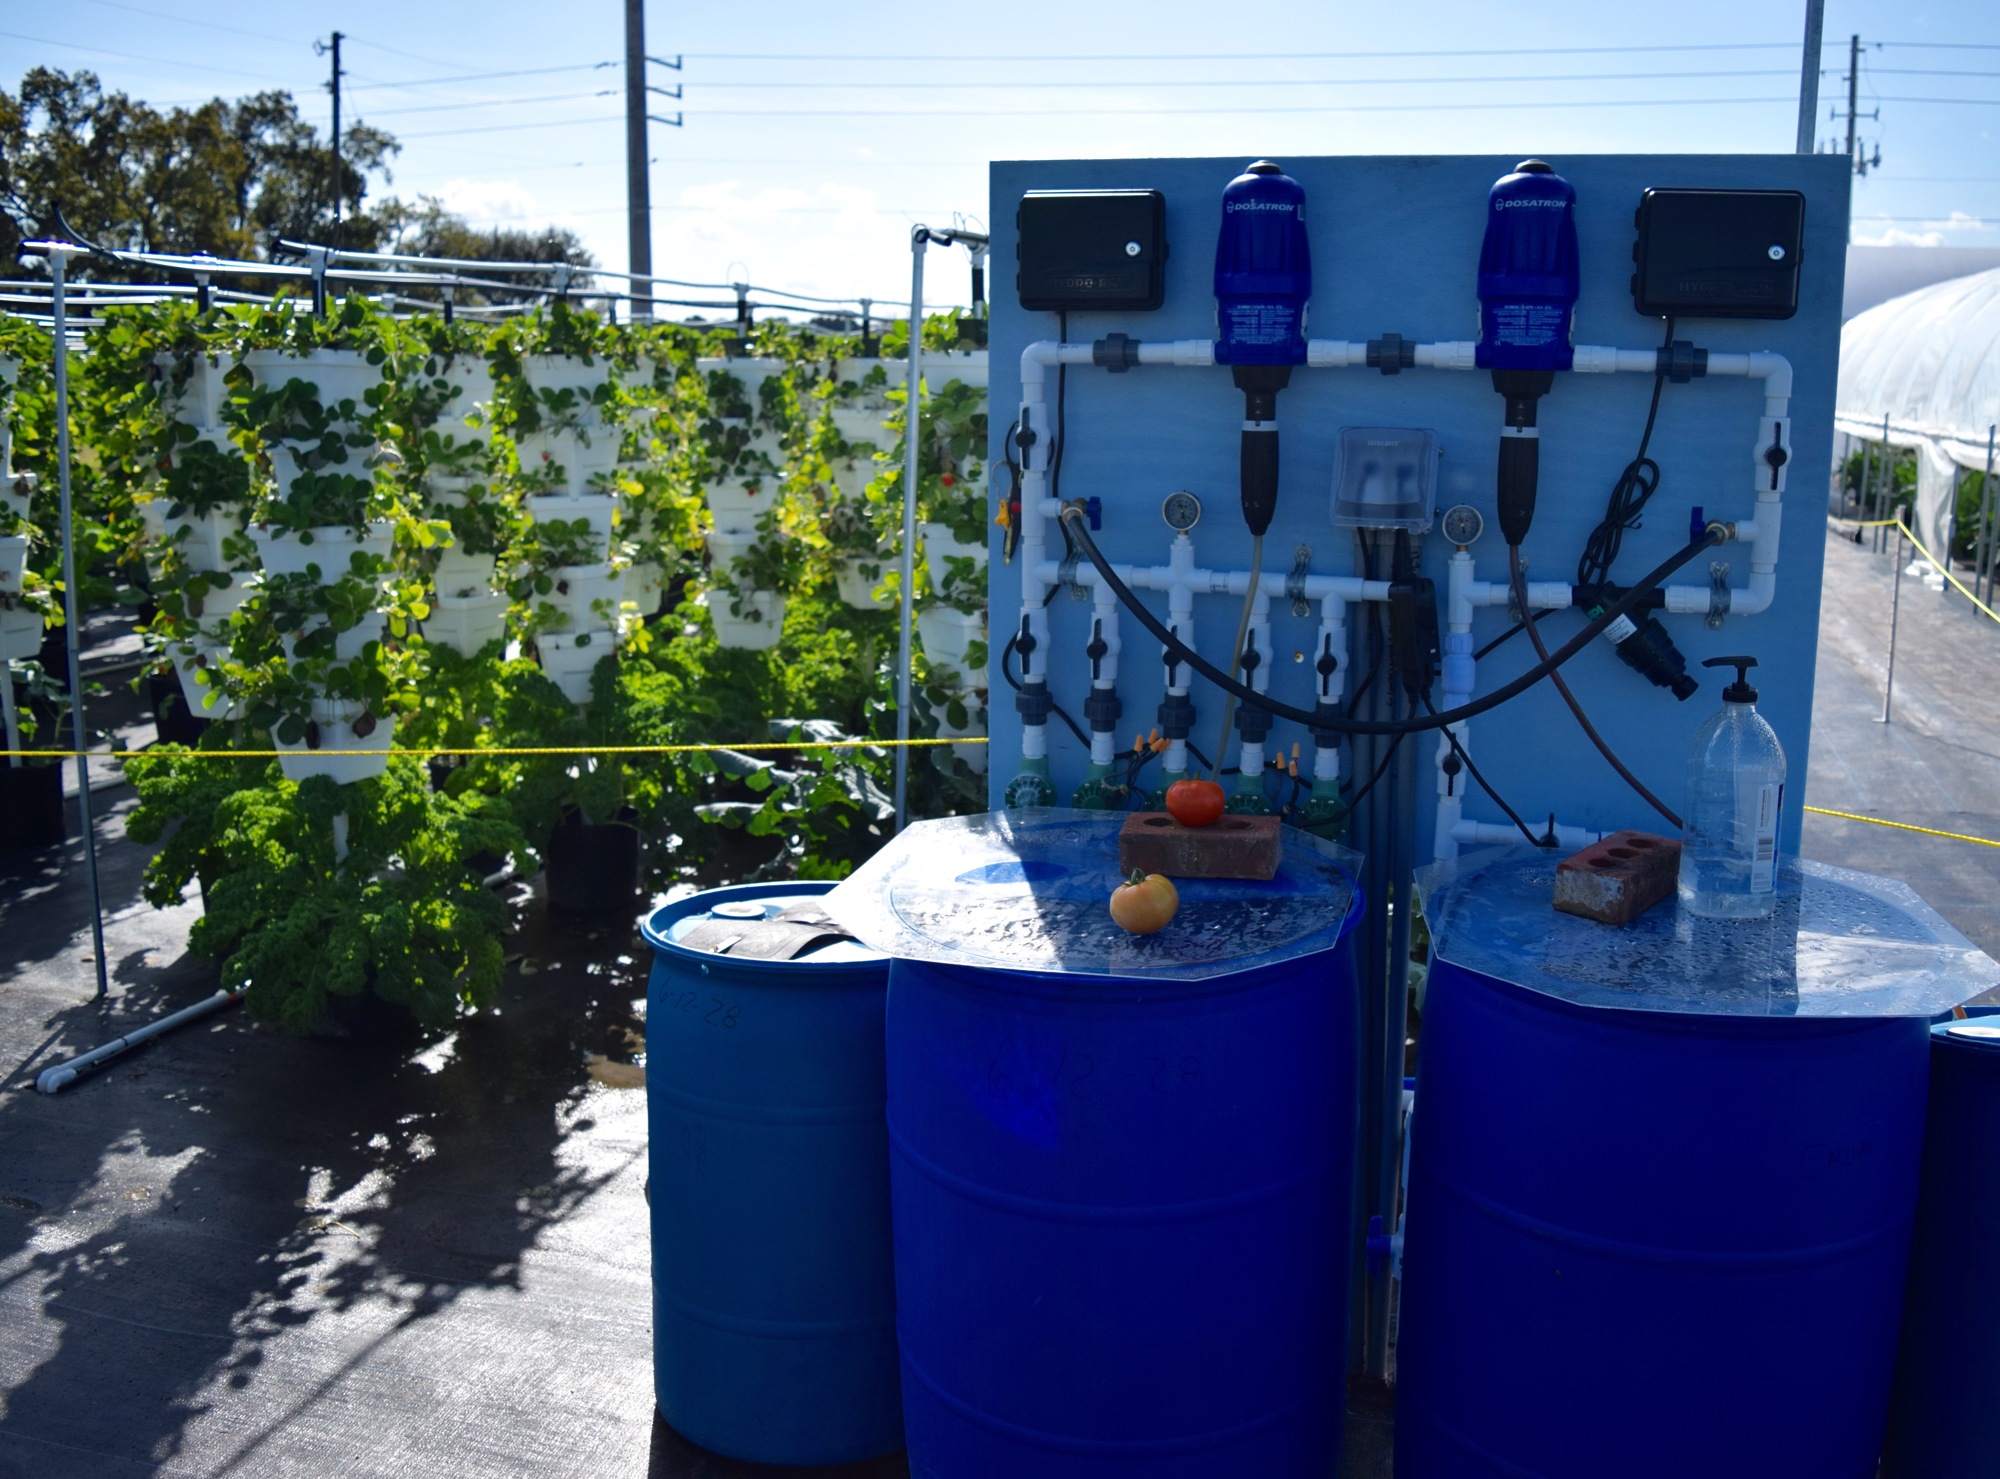 Part of the Bekemeyers’ hydroponics system. Water and nutrients such as calcium are stored in the barrels and distributed via pipes and tubes to the various vertical structures to nourish the growing produce.